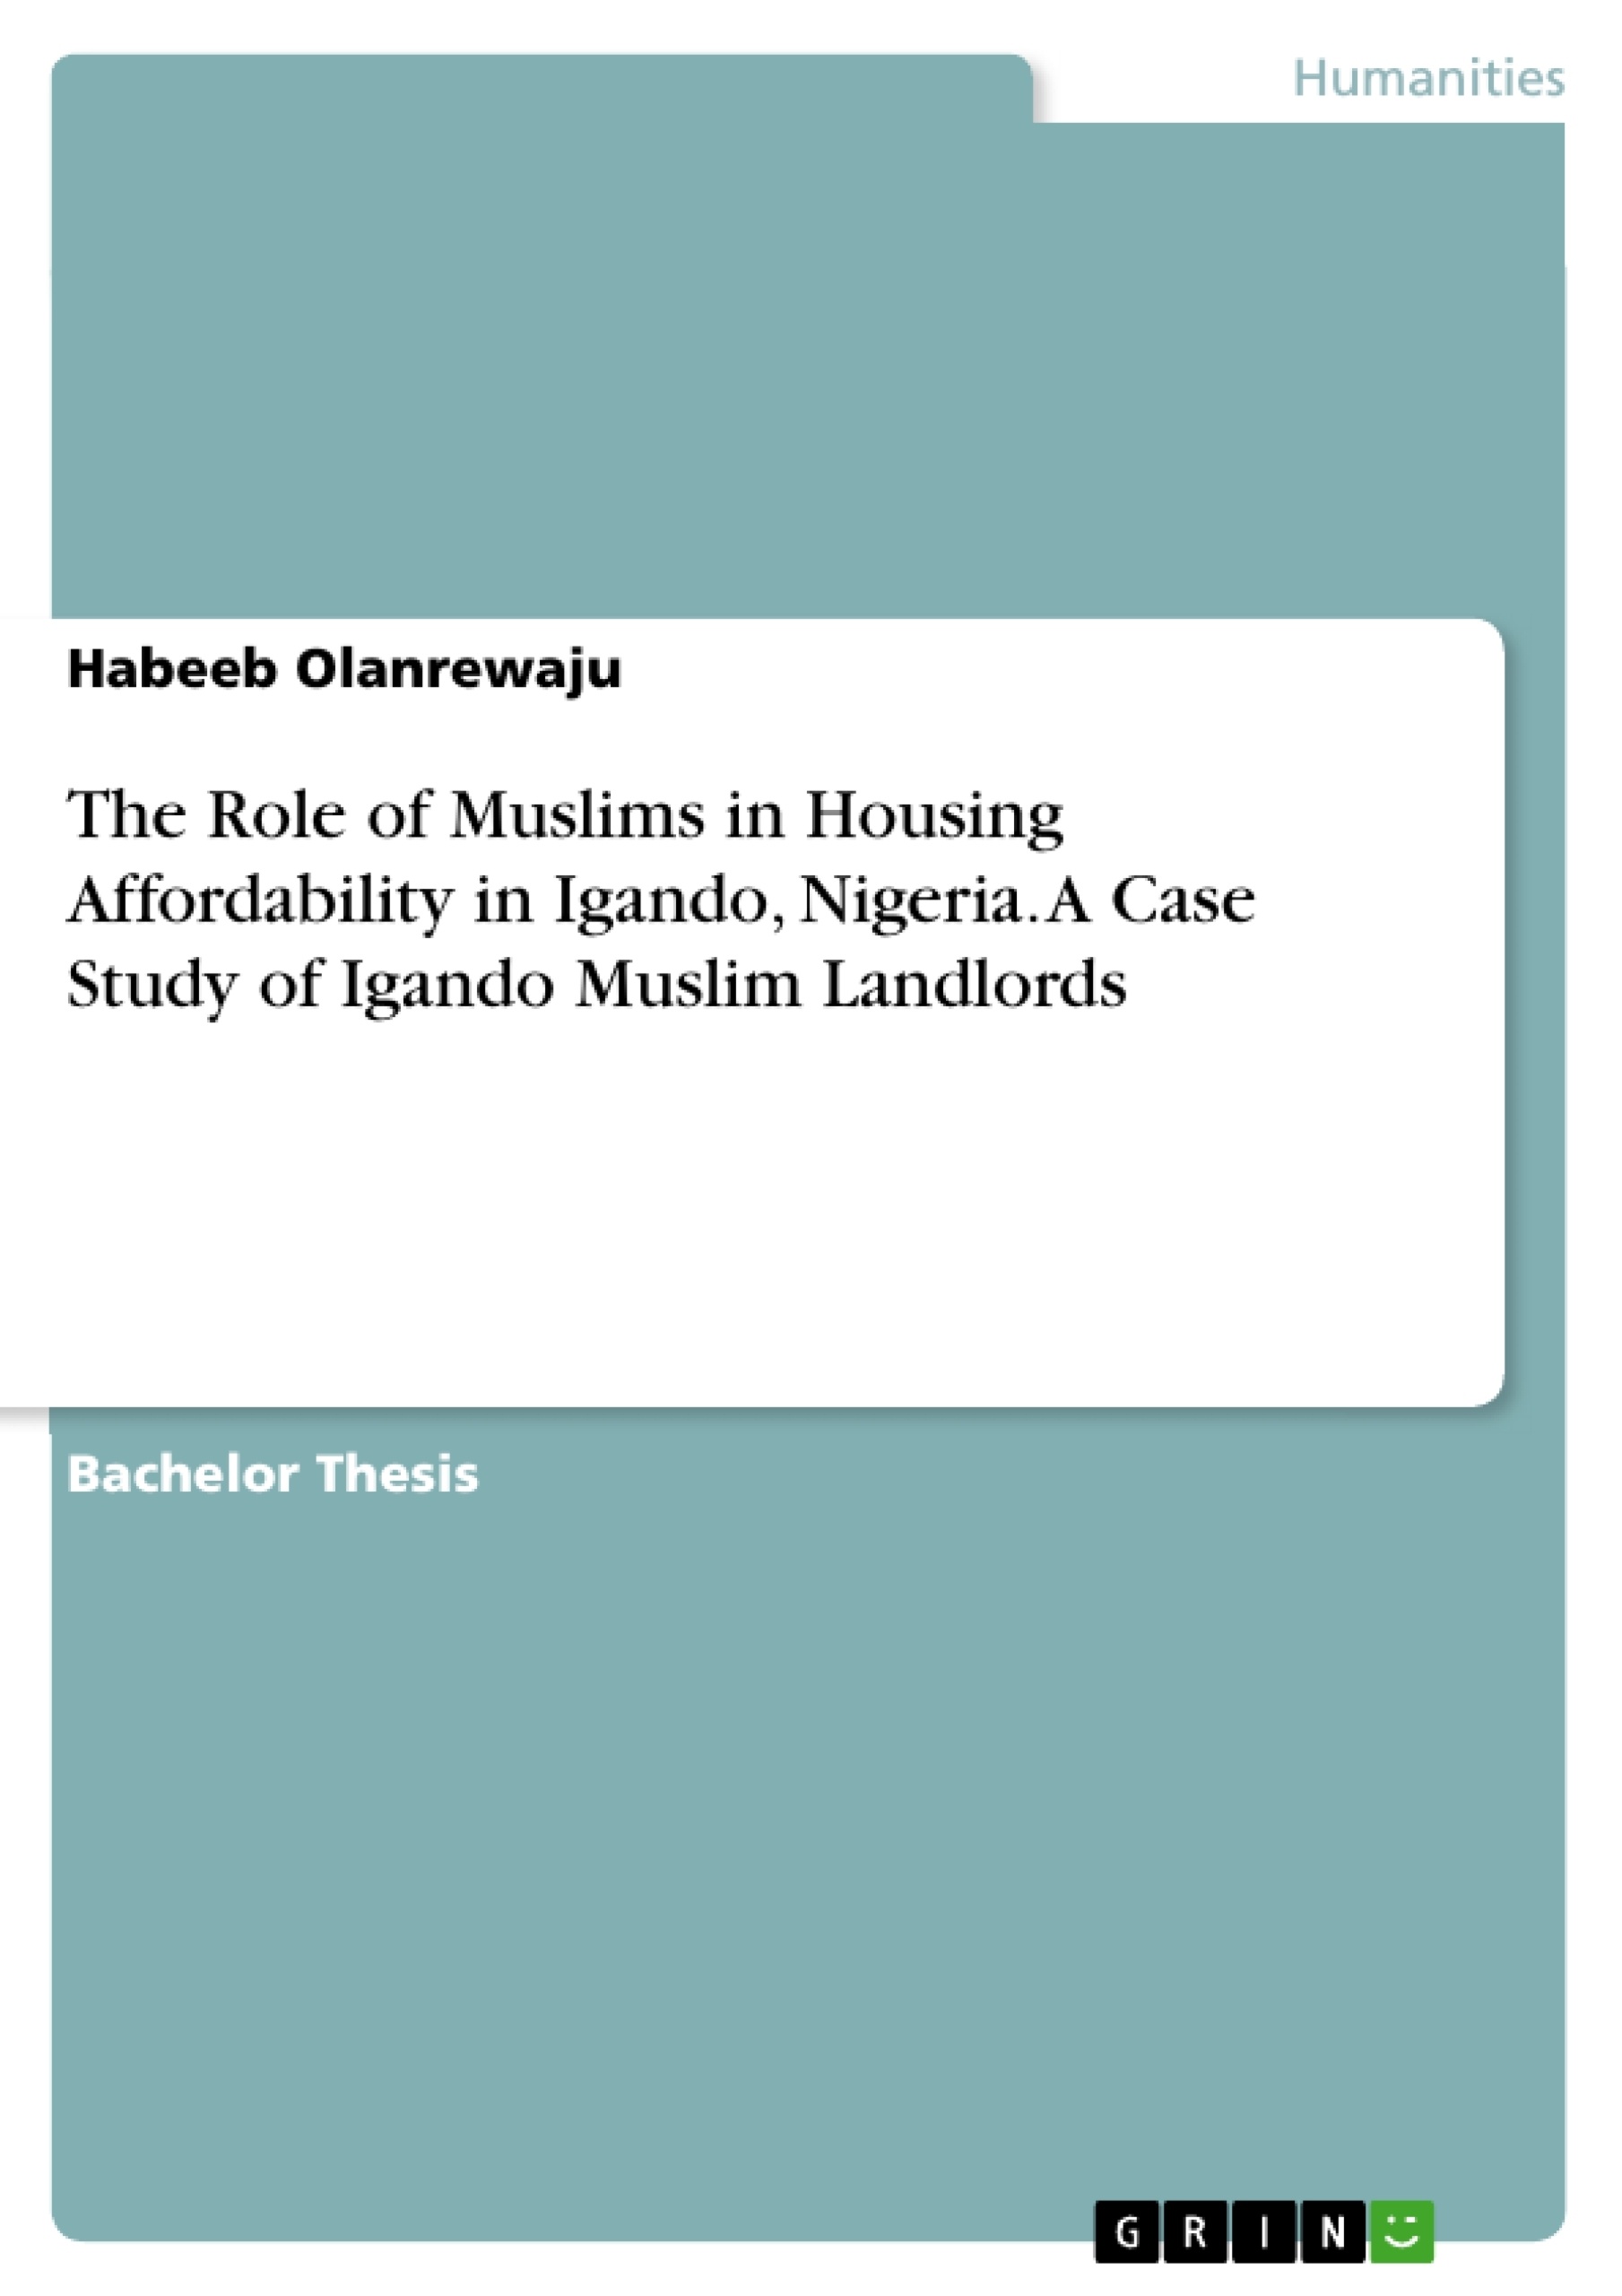 Título: The Role of Muslims in Housing Affordability in Igando, Nigeria. A Case Study of Igando Muslim Landlords